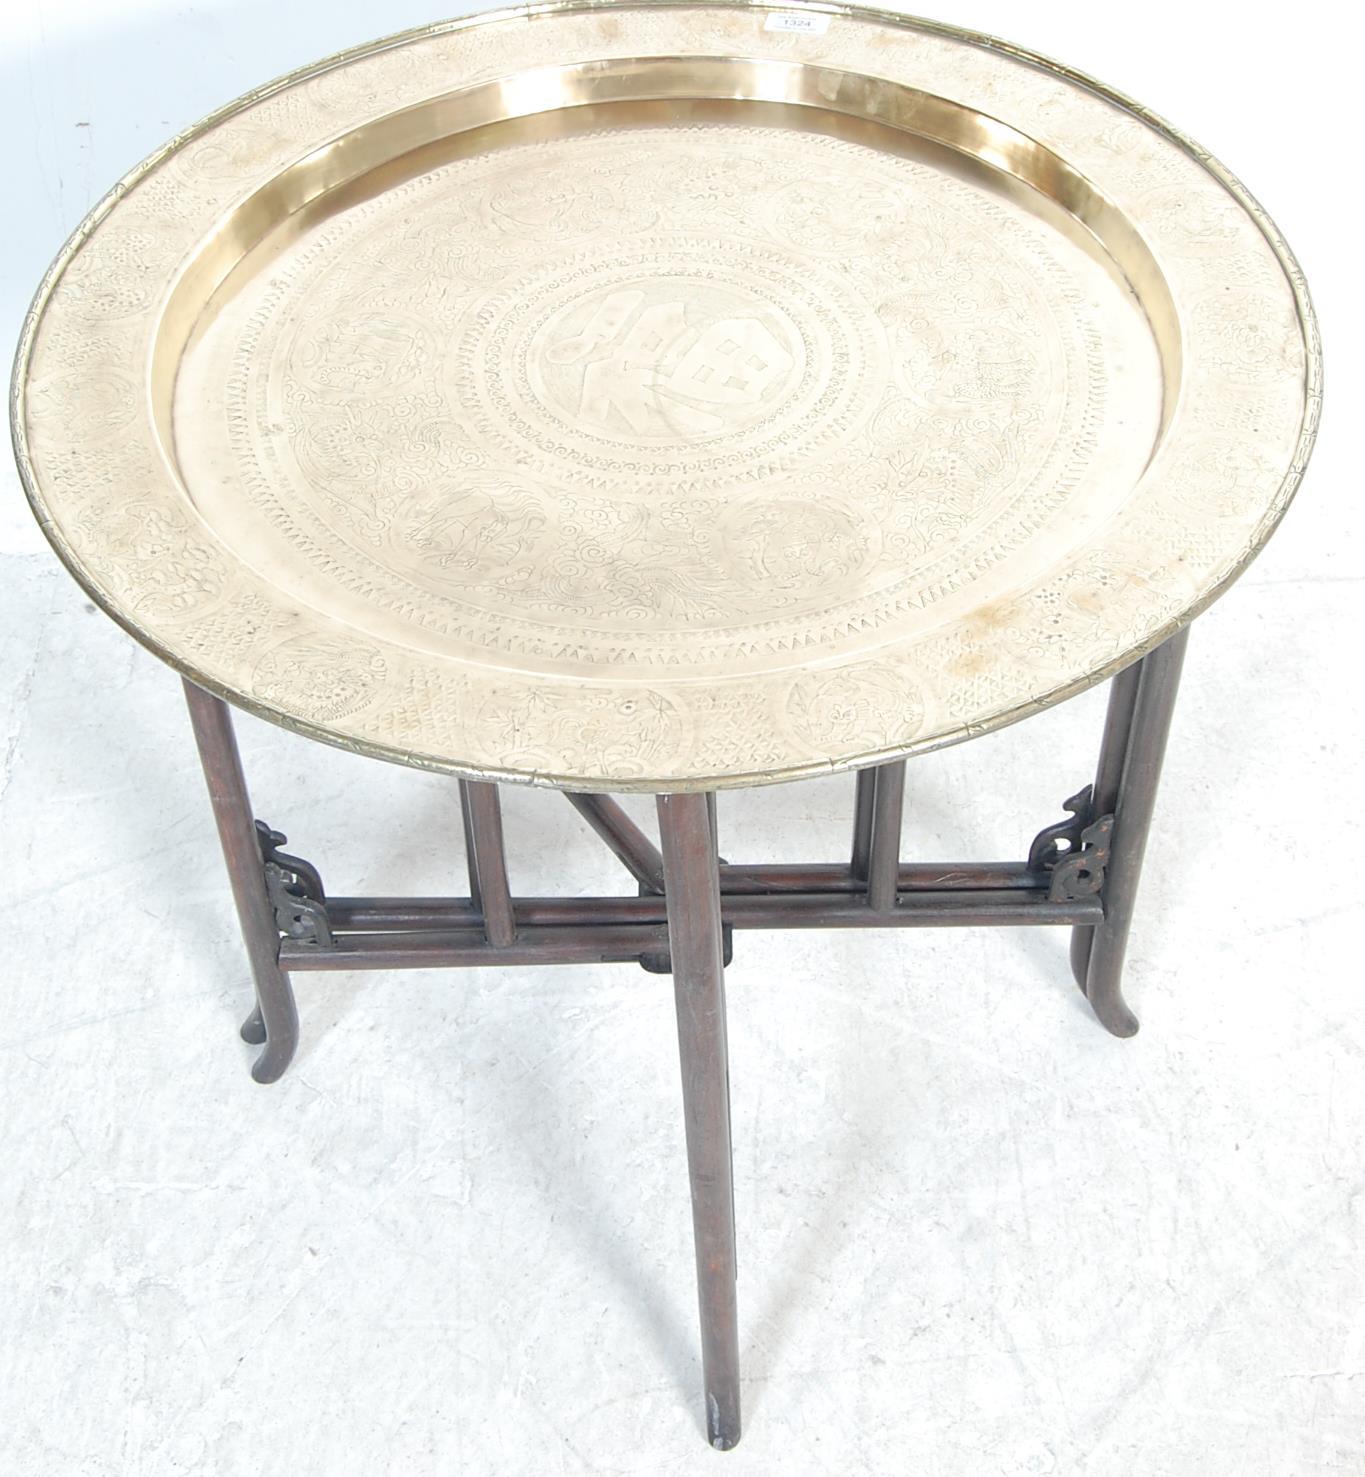 ANTIQUE EARLY 20TH CENTURY BENARES TABLE - Image 2 of 7